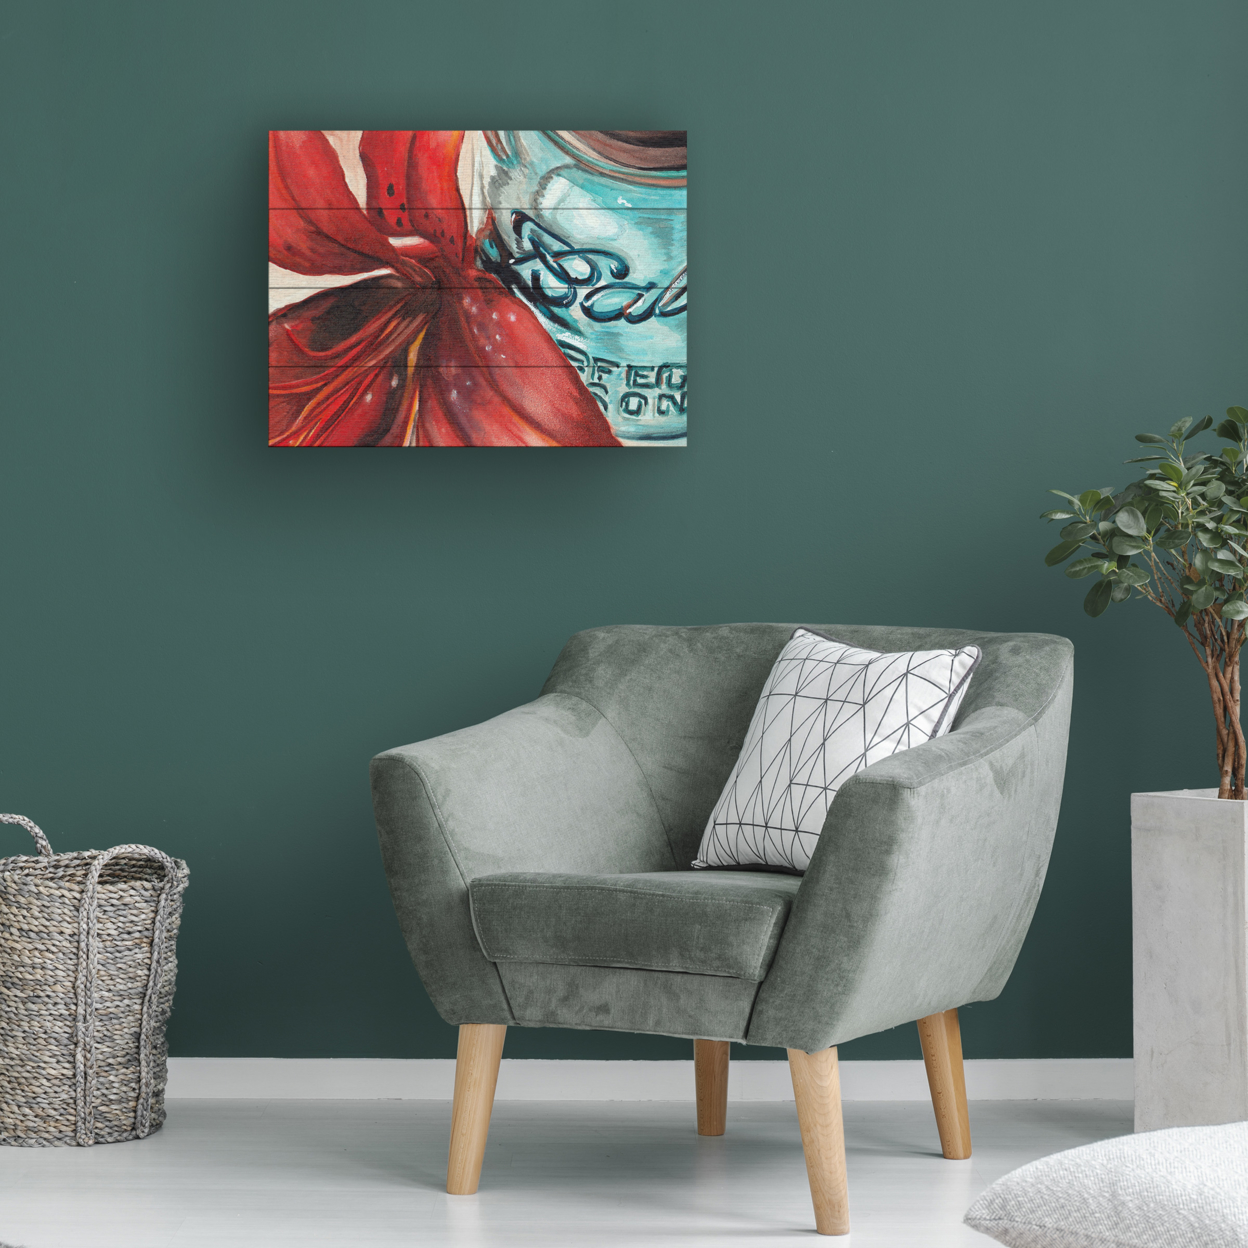 Wall Art 12 X 16 Inches Titled Ball Jar Red Lily Ready To Hang Printed On Wooden Planks